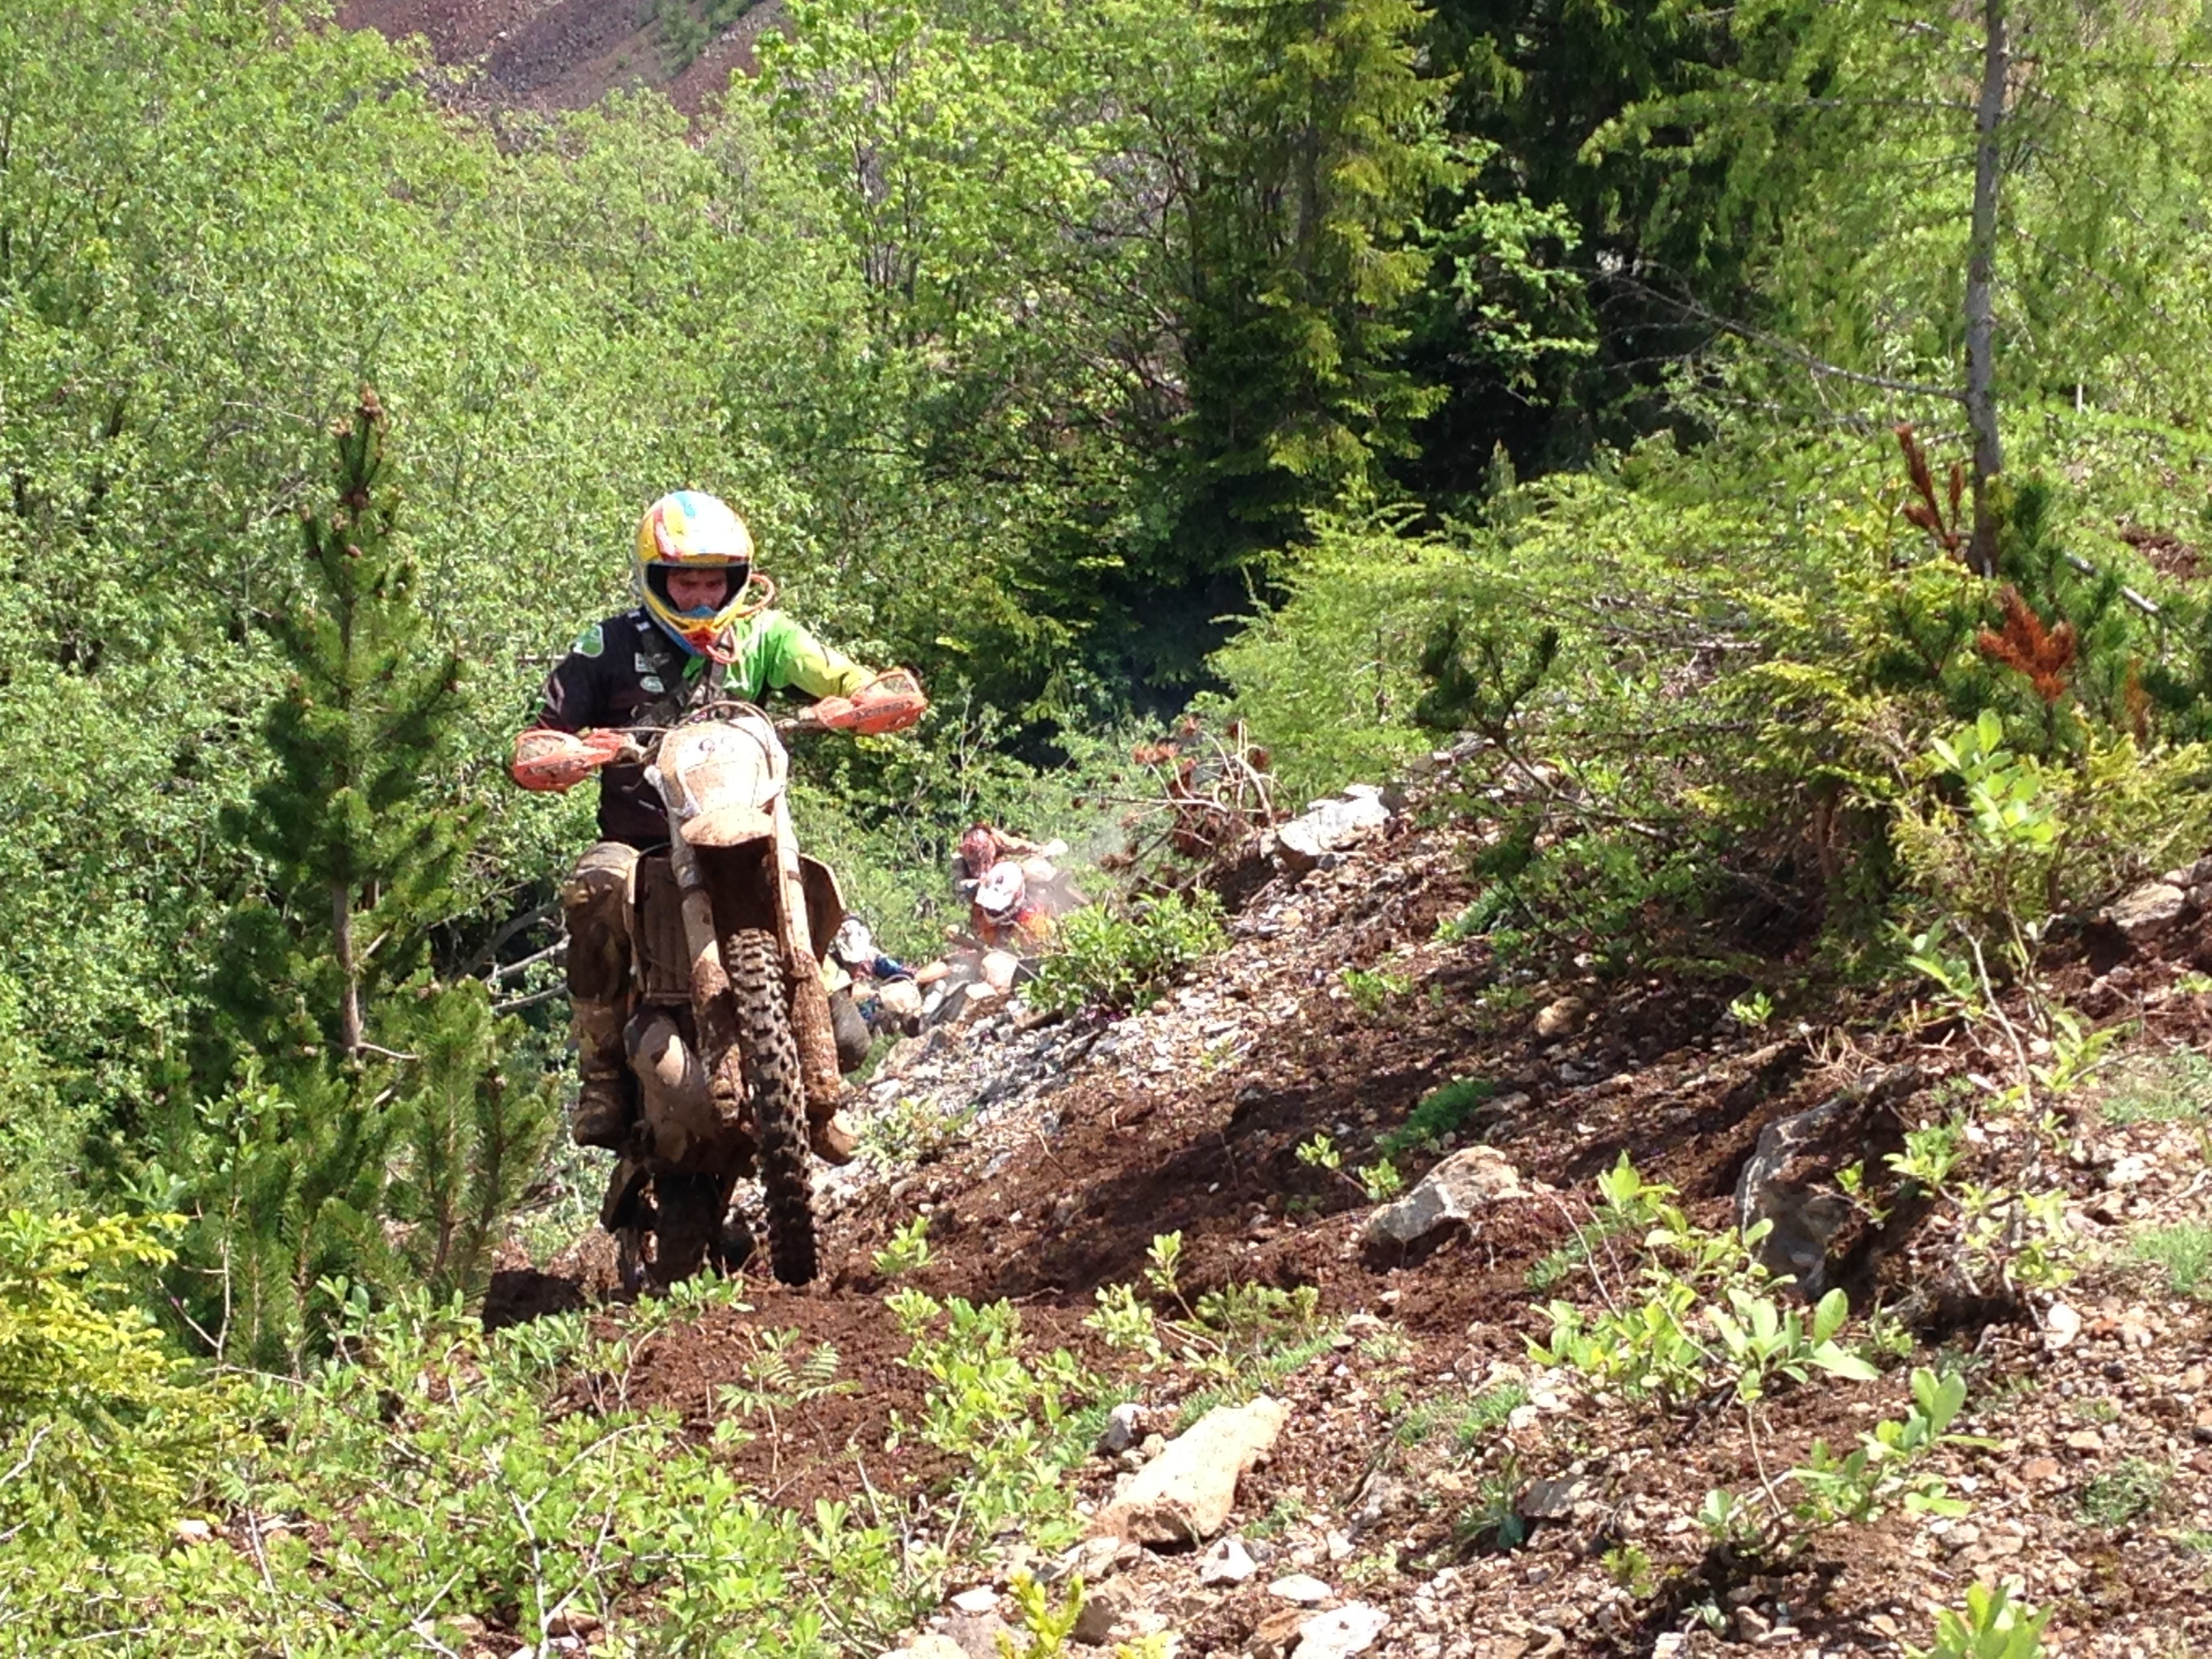 human riding on the motocross dirt bike on the mountain during daytime